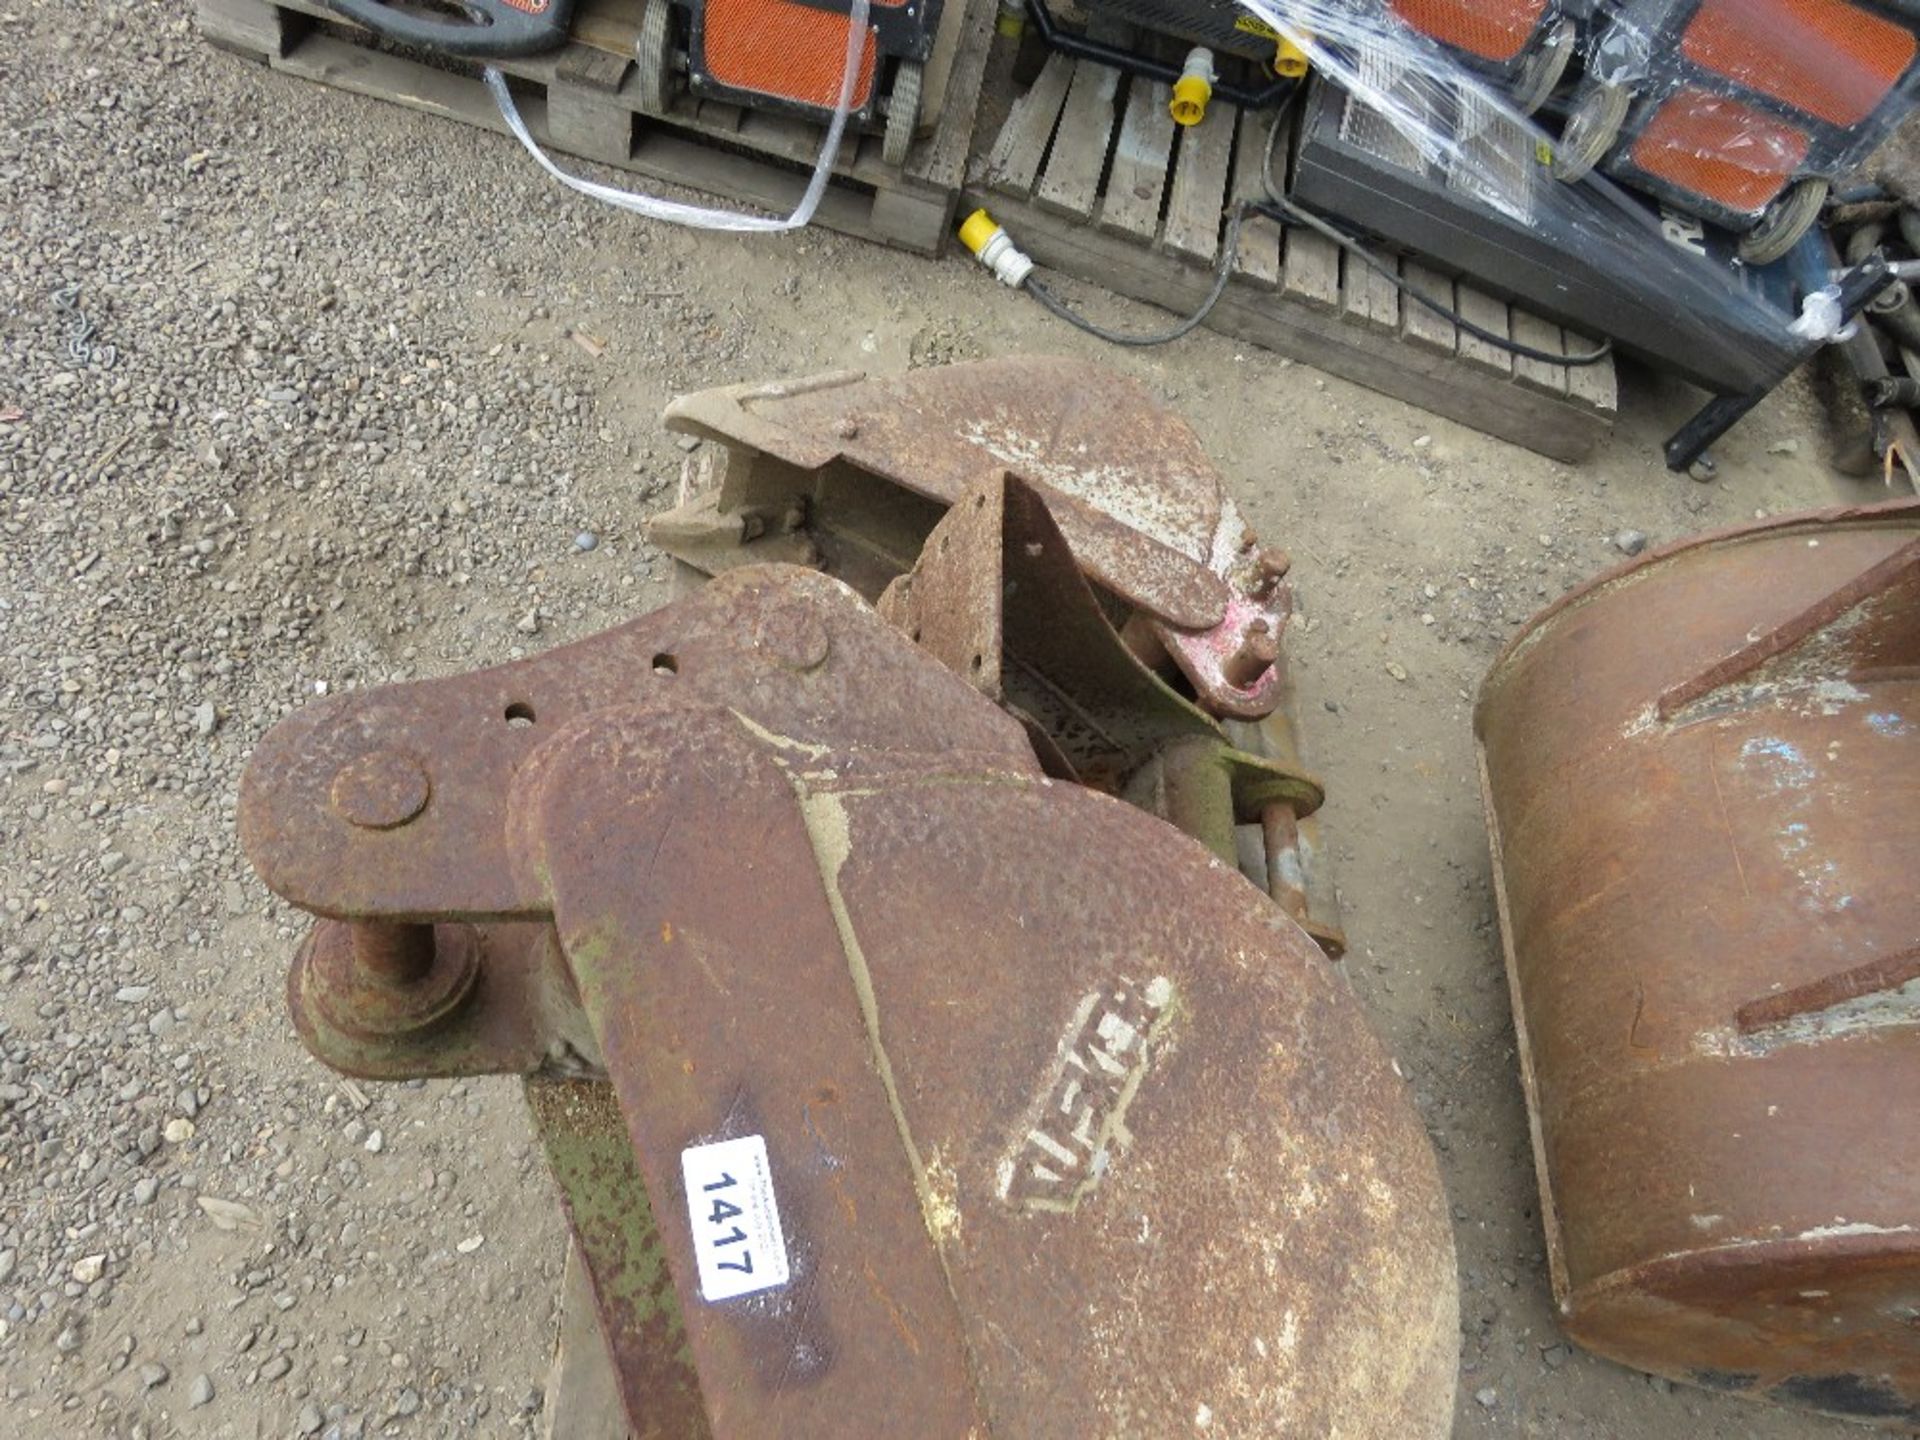 4 X ASSORTED MINI EXCAVATOR BUCKETS. DIRECT FROM A LOCAL GROUNDWORKS COMPANY AS PART OF THEIR RES - Image 3 of 3